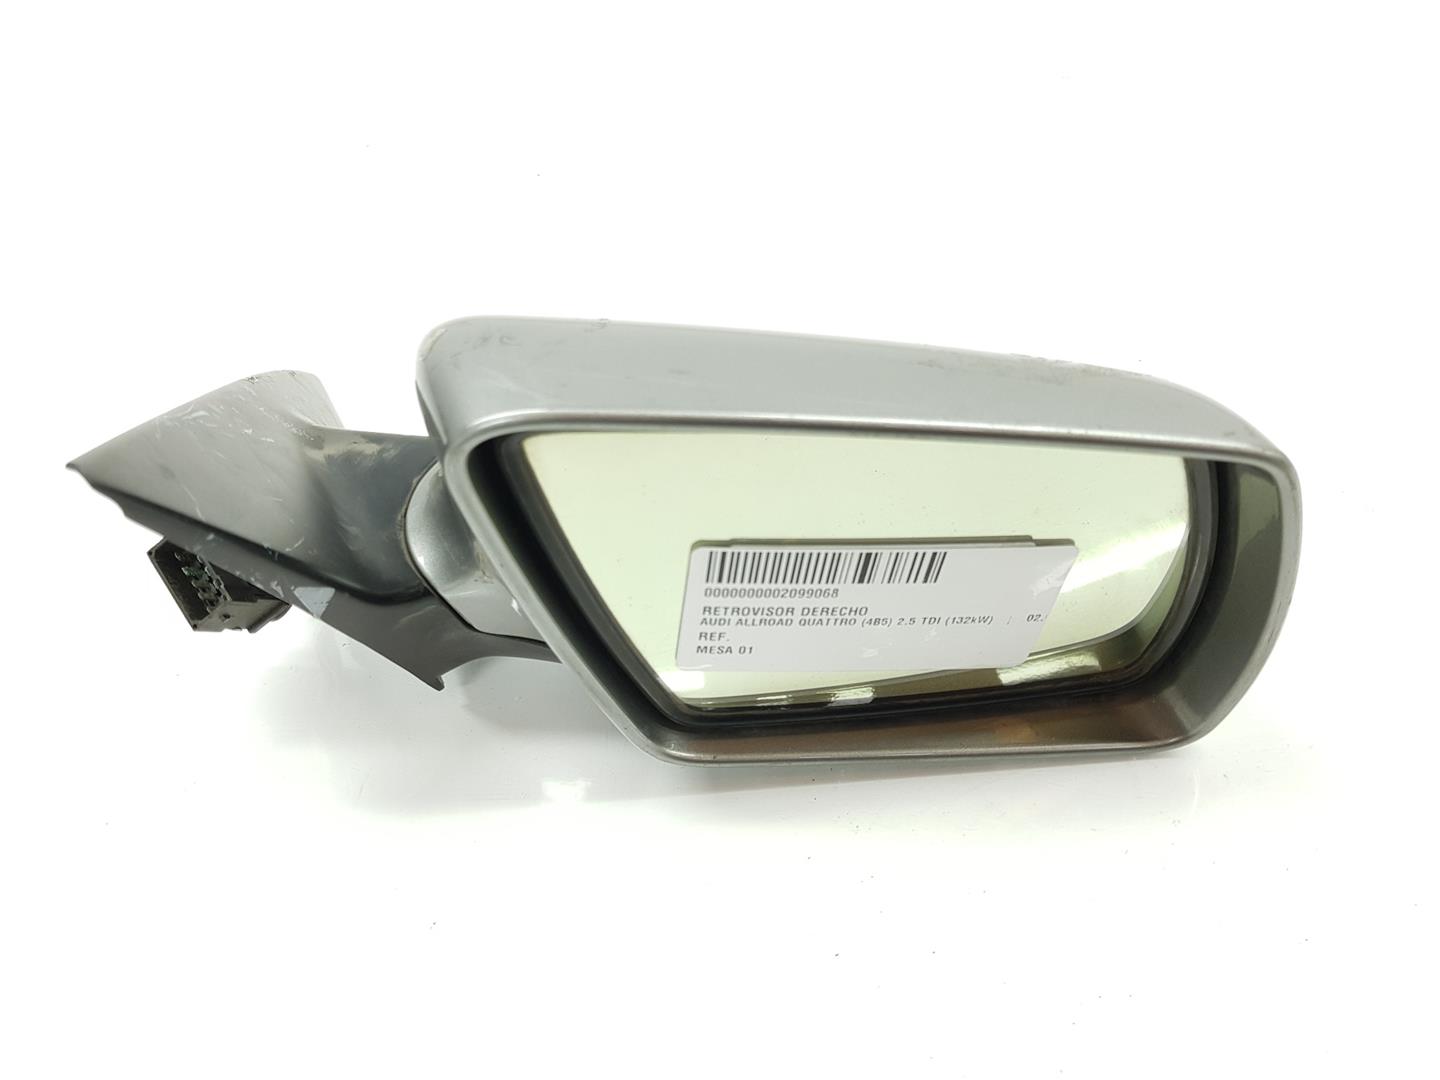 AUDI A6 allroad C5 (2000-2006) Right Side Wing Mirror 4Z7858532A, 4Z7858532A 24243977